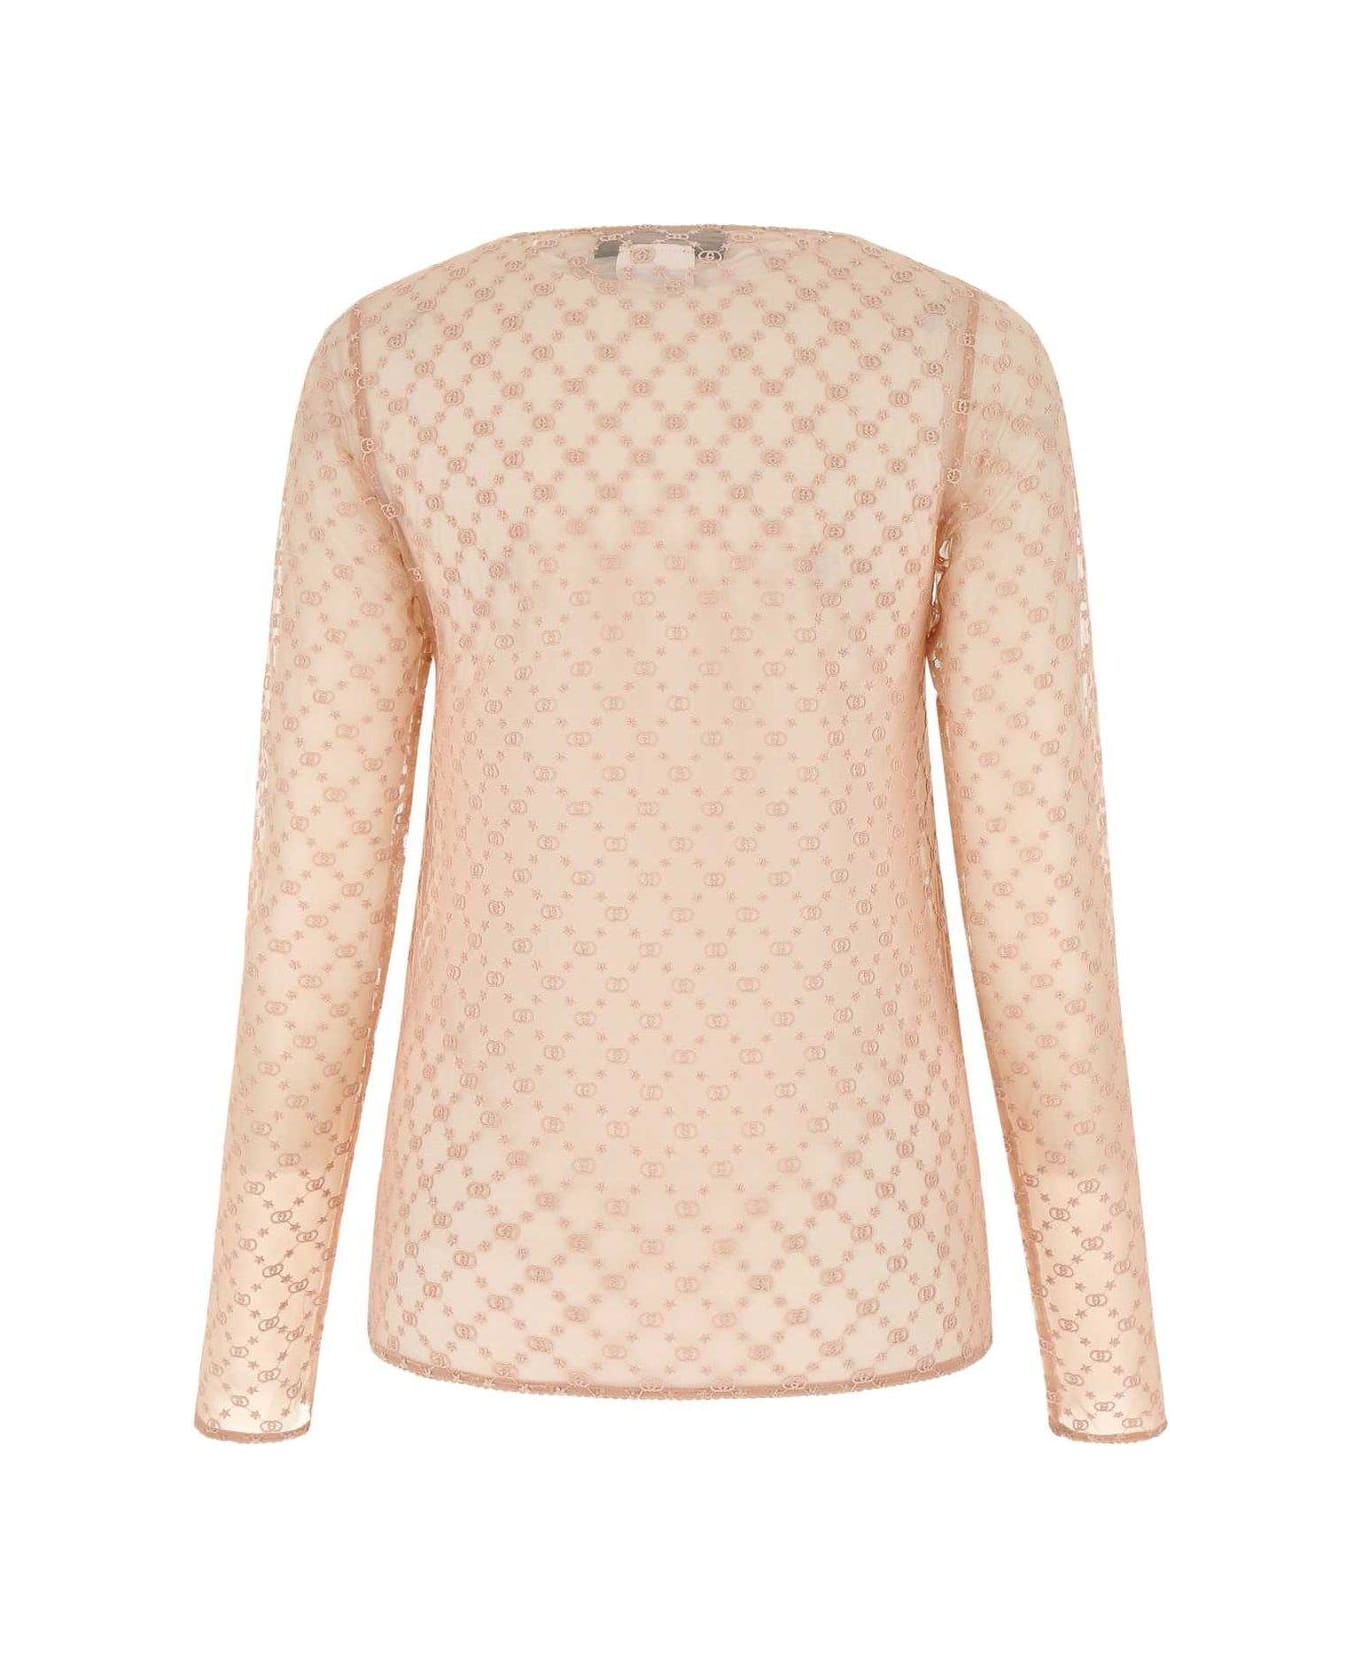 Gucci Embroidered Mesh Top - Rosa